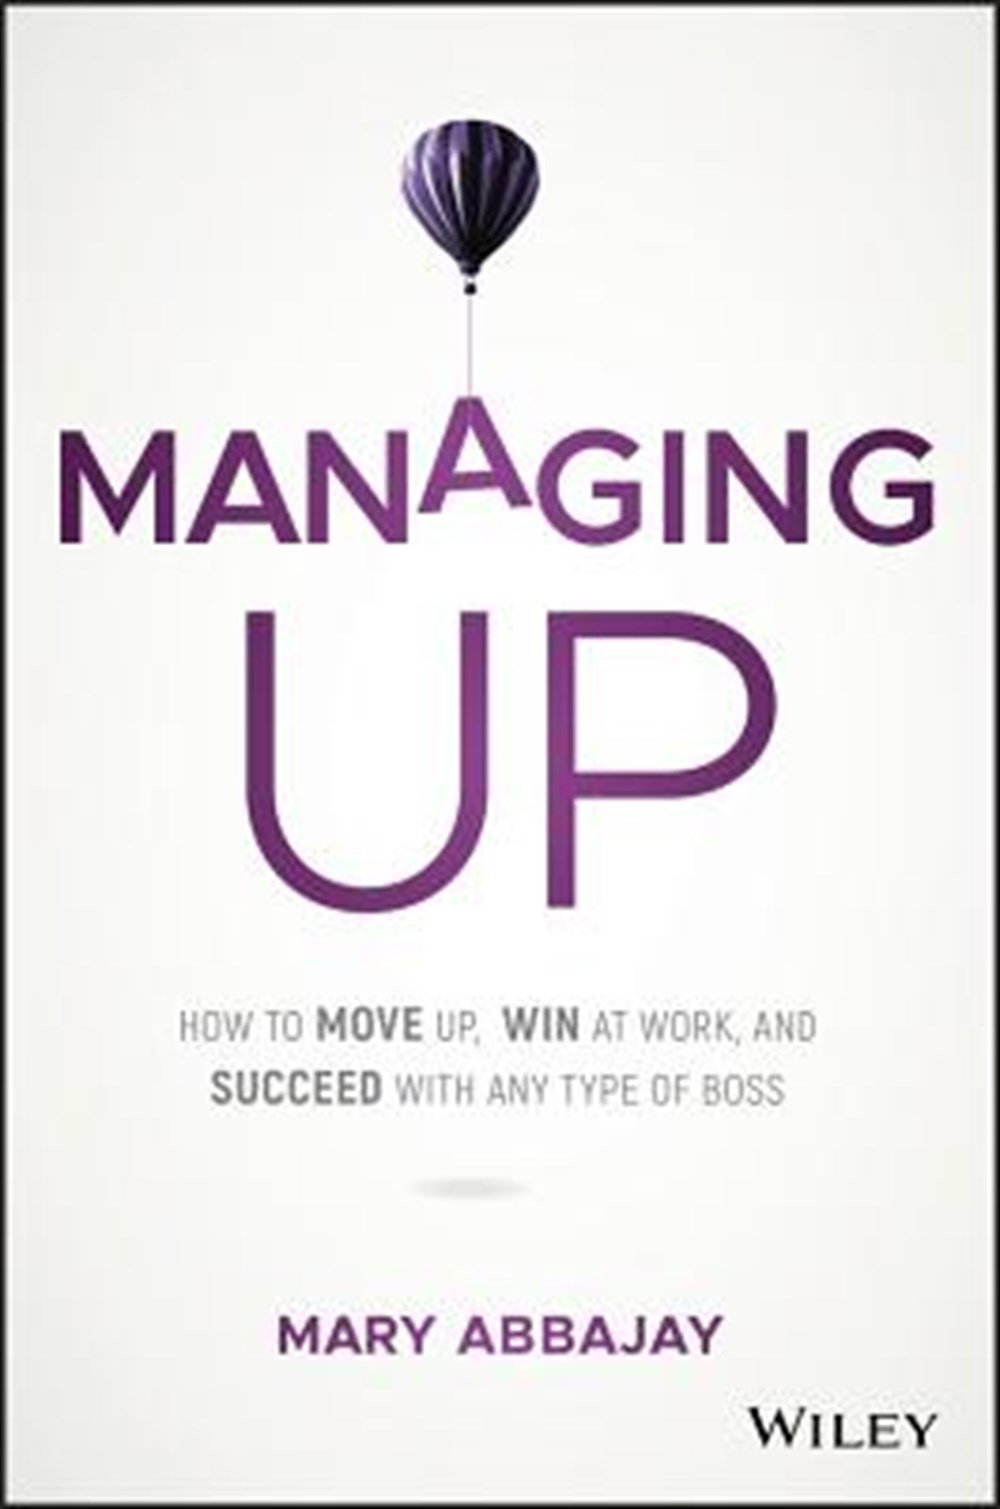 Managing Up How to Move Up, Win at Work, and Succeed with Any Type of Boss